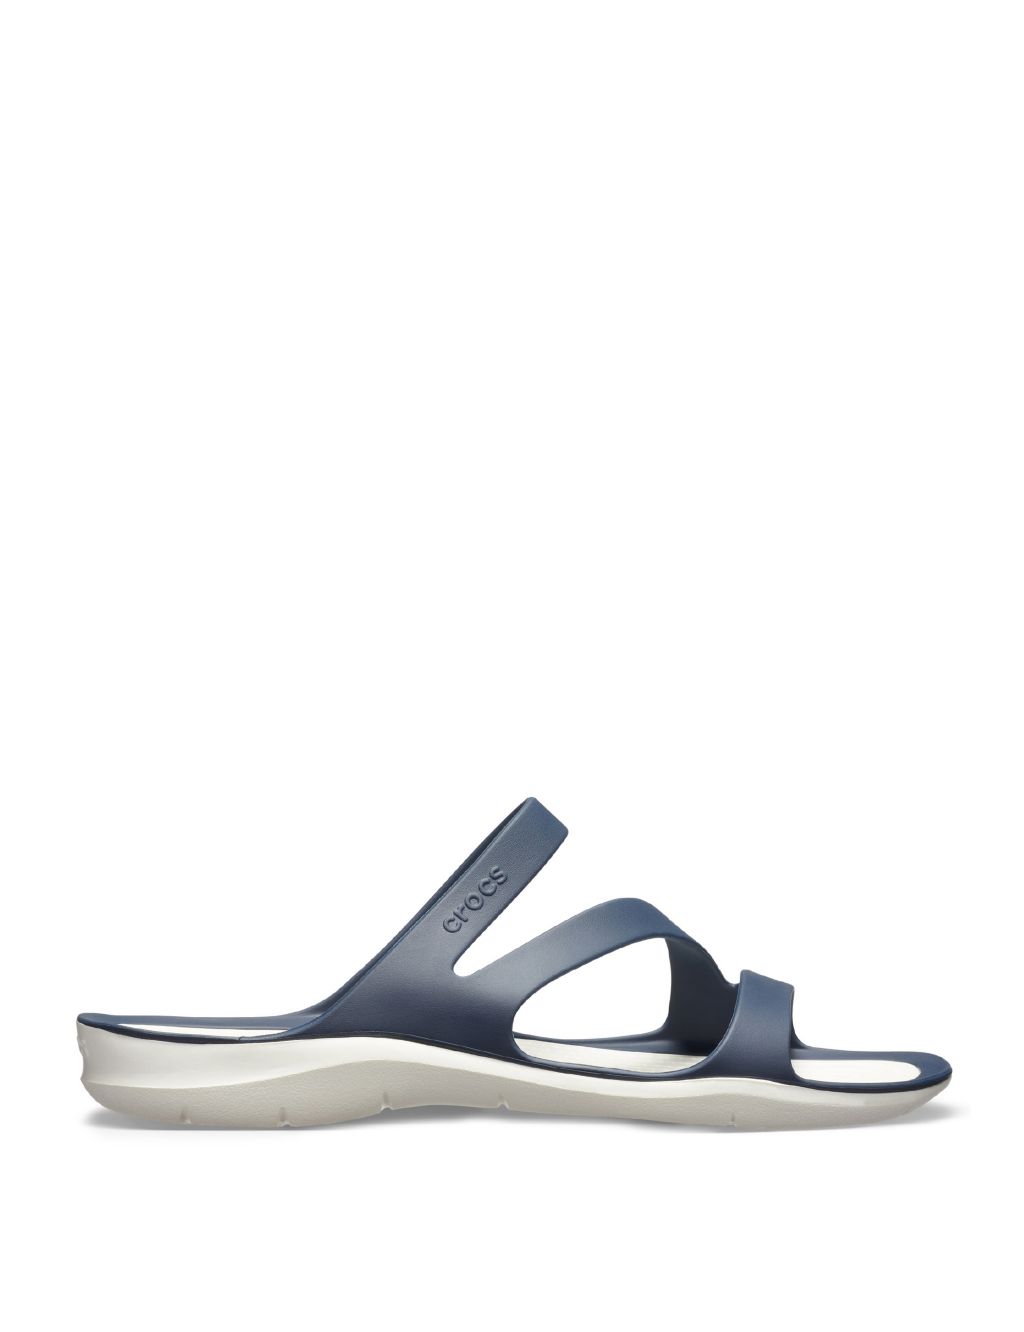 Swiftwater™ Strappy Sliders image 1